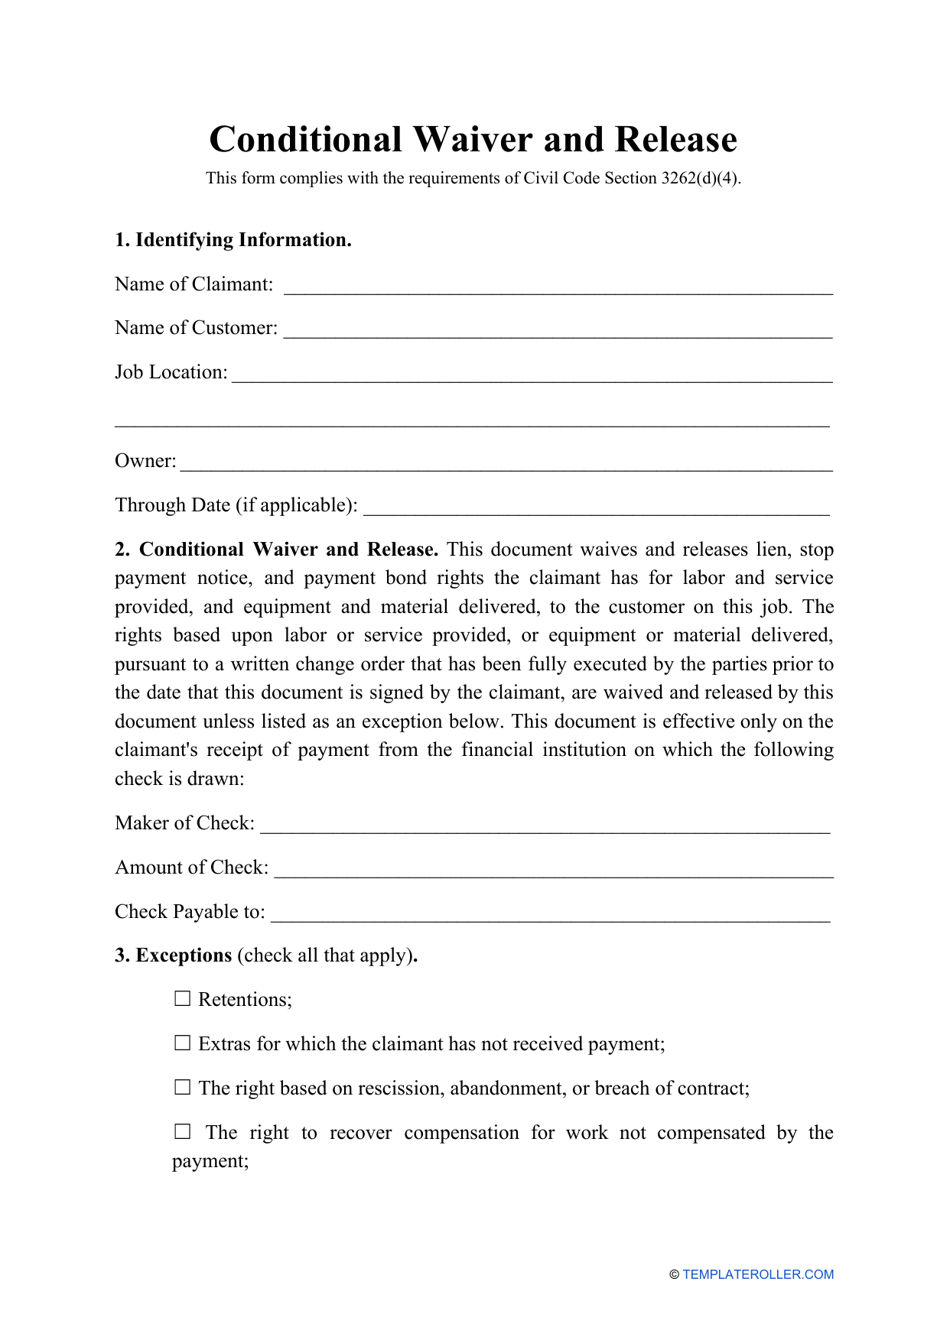 Conditional Waiver and Release Form, Page 1